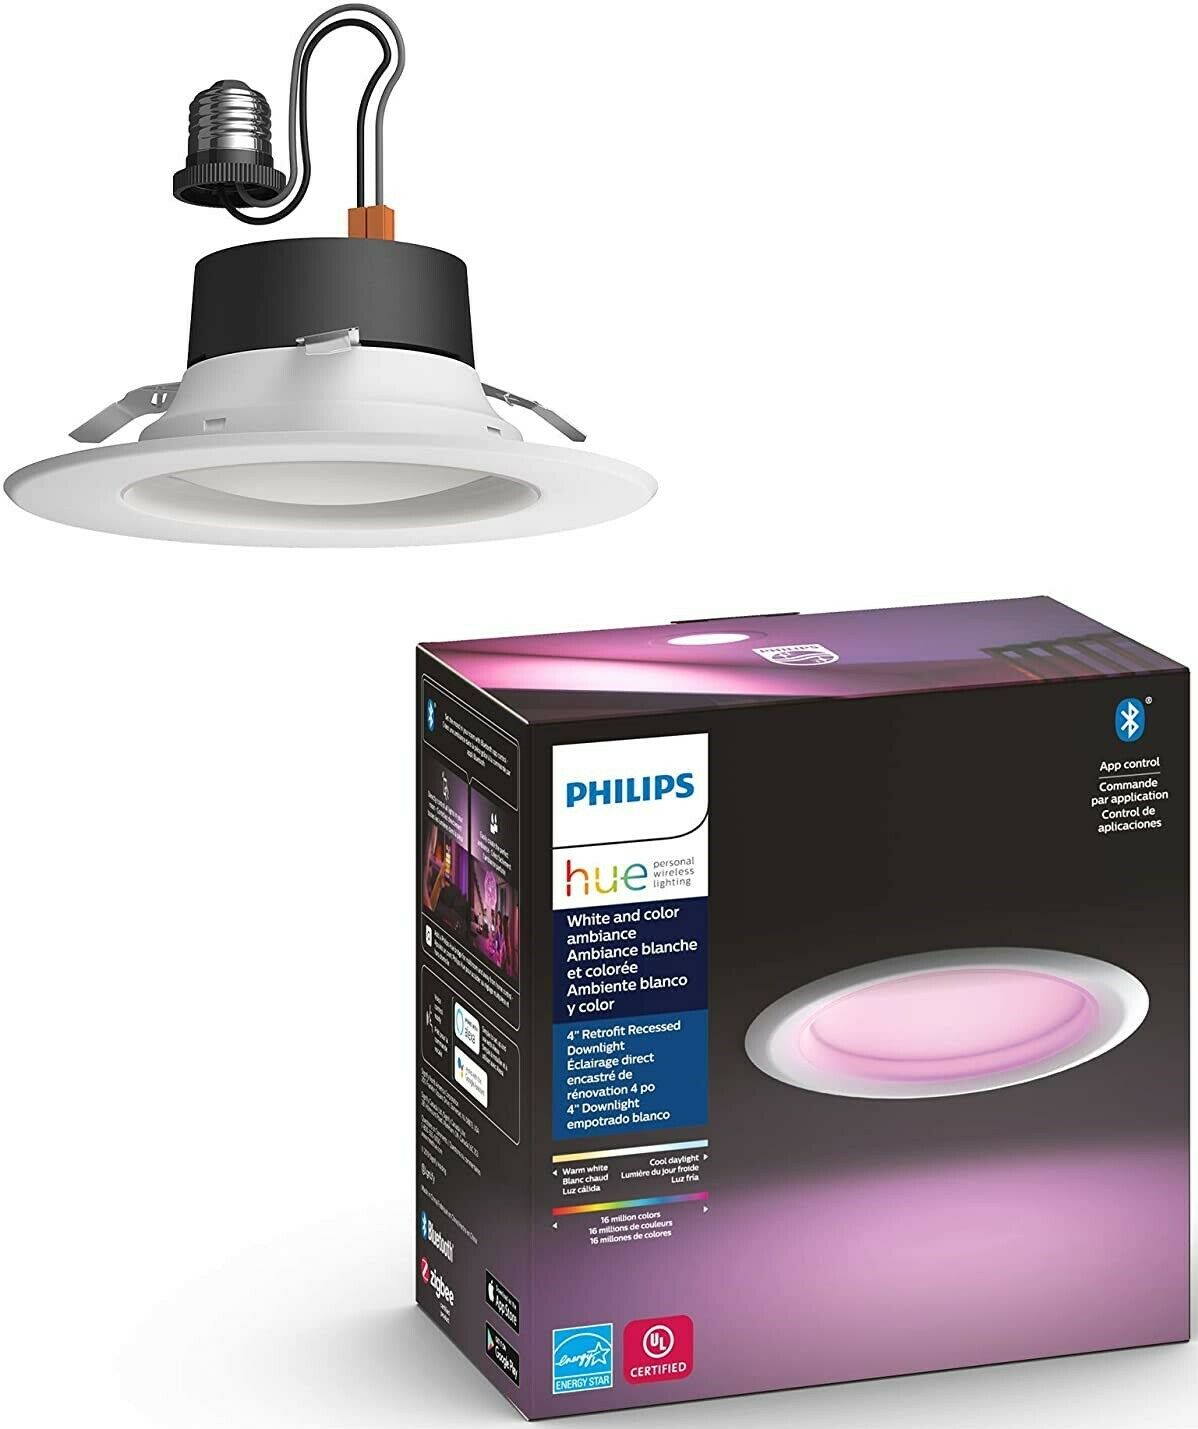 Philips Hue White & Color Ambiance Led Smart Retrofit 4" Recessed Downlight